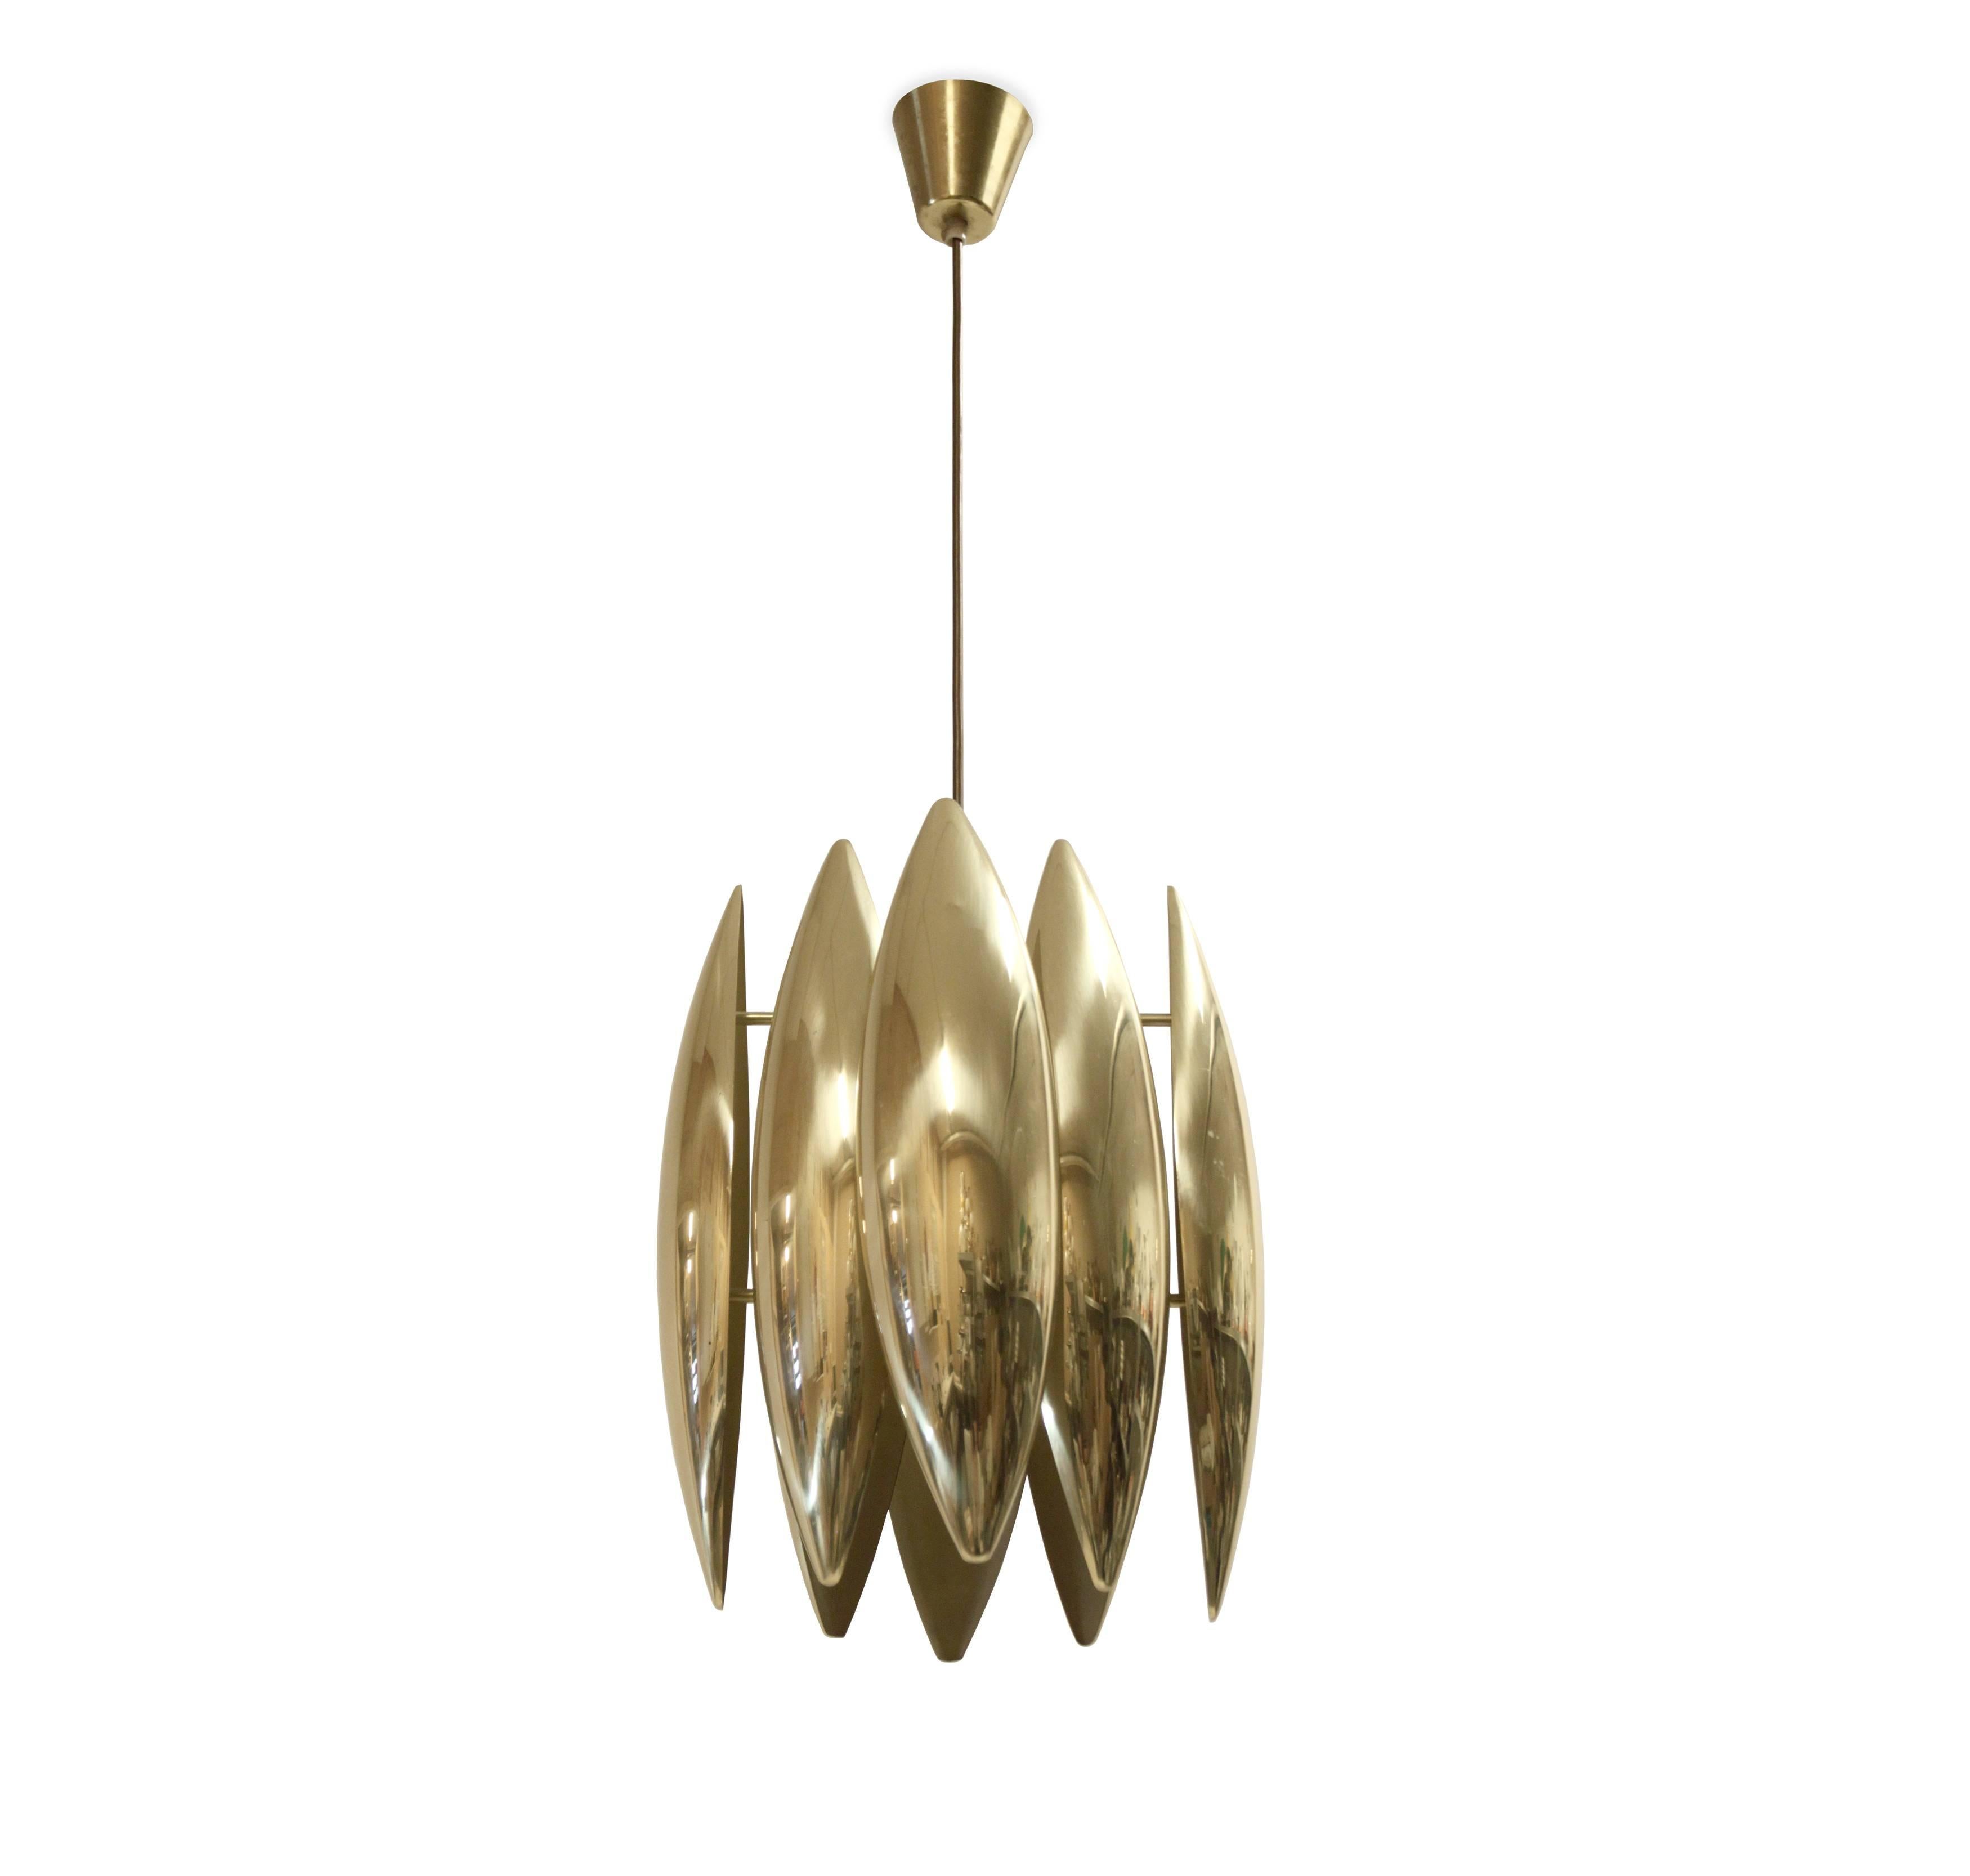 Iconic and decorative ceiling light in brass. This is model 'Kastor', designed by Jo Hammerborg for Fog & Mørup and in production from 1960s second half. The lamp is fully working and in excellent vintage condition.